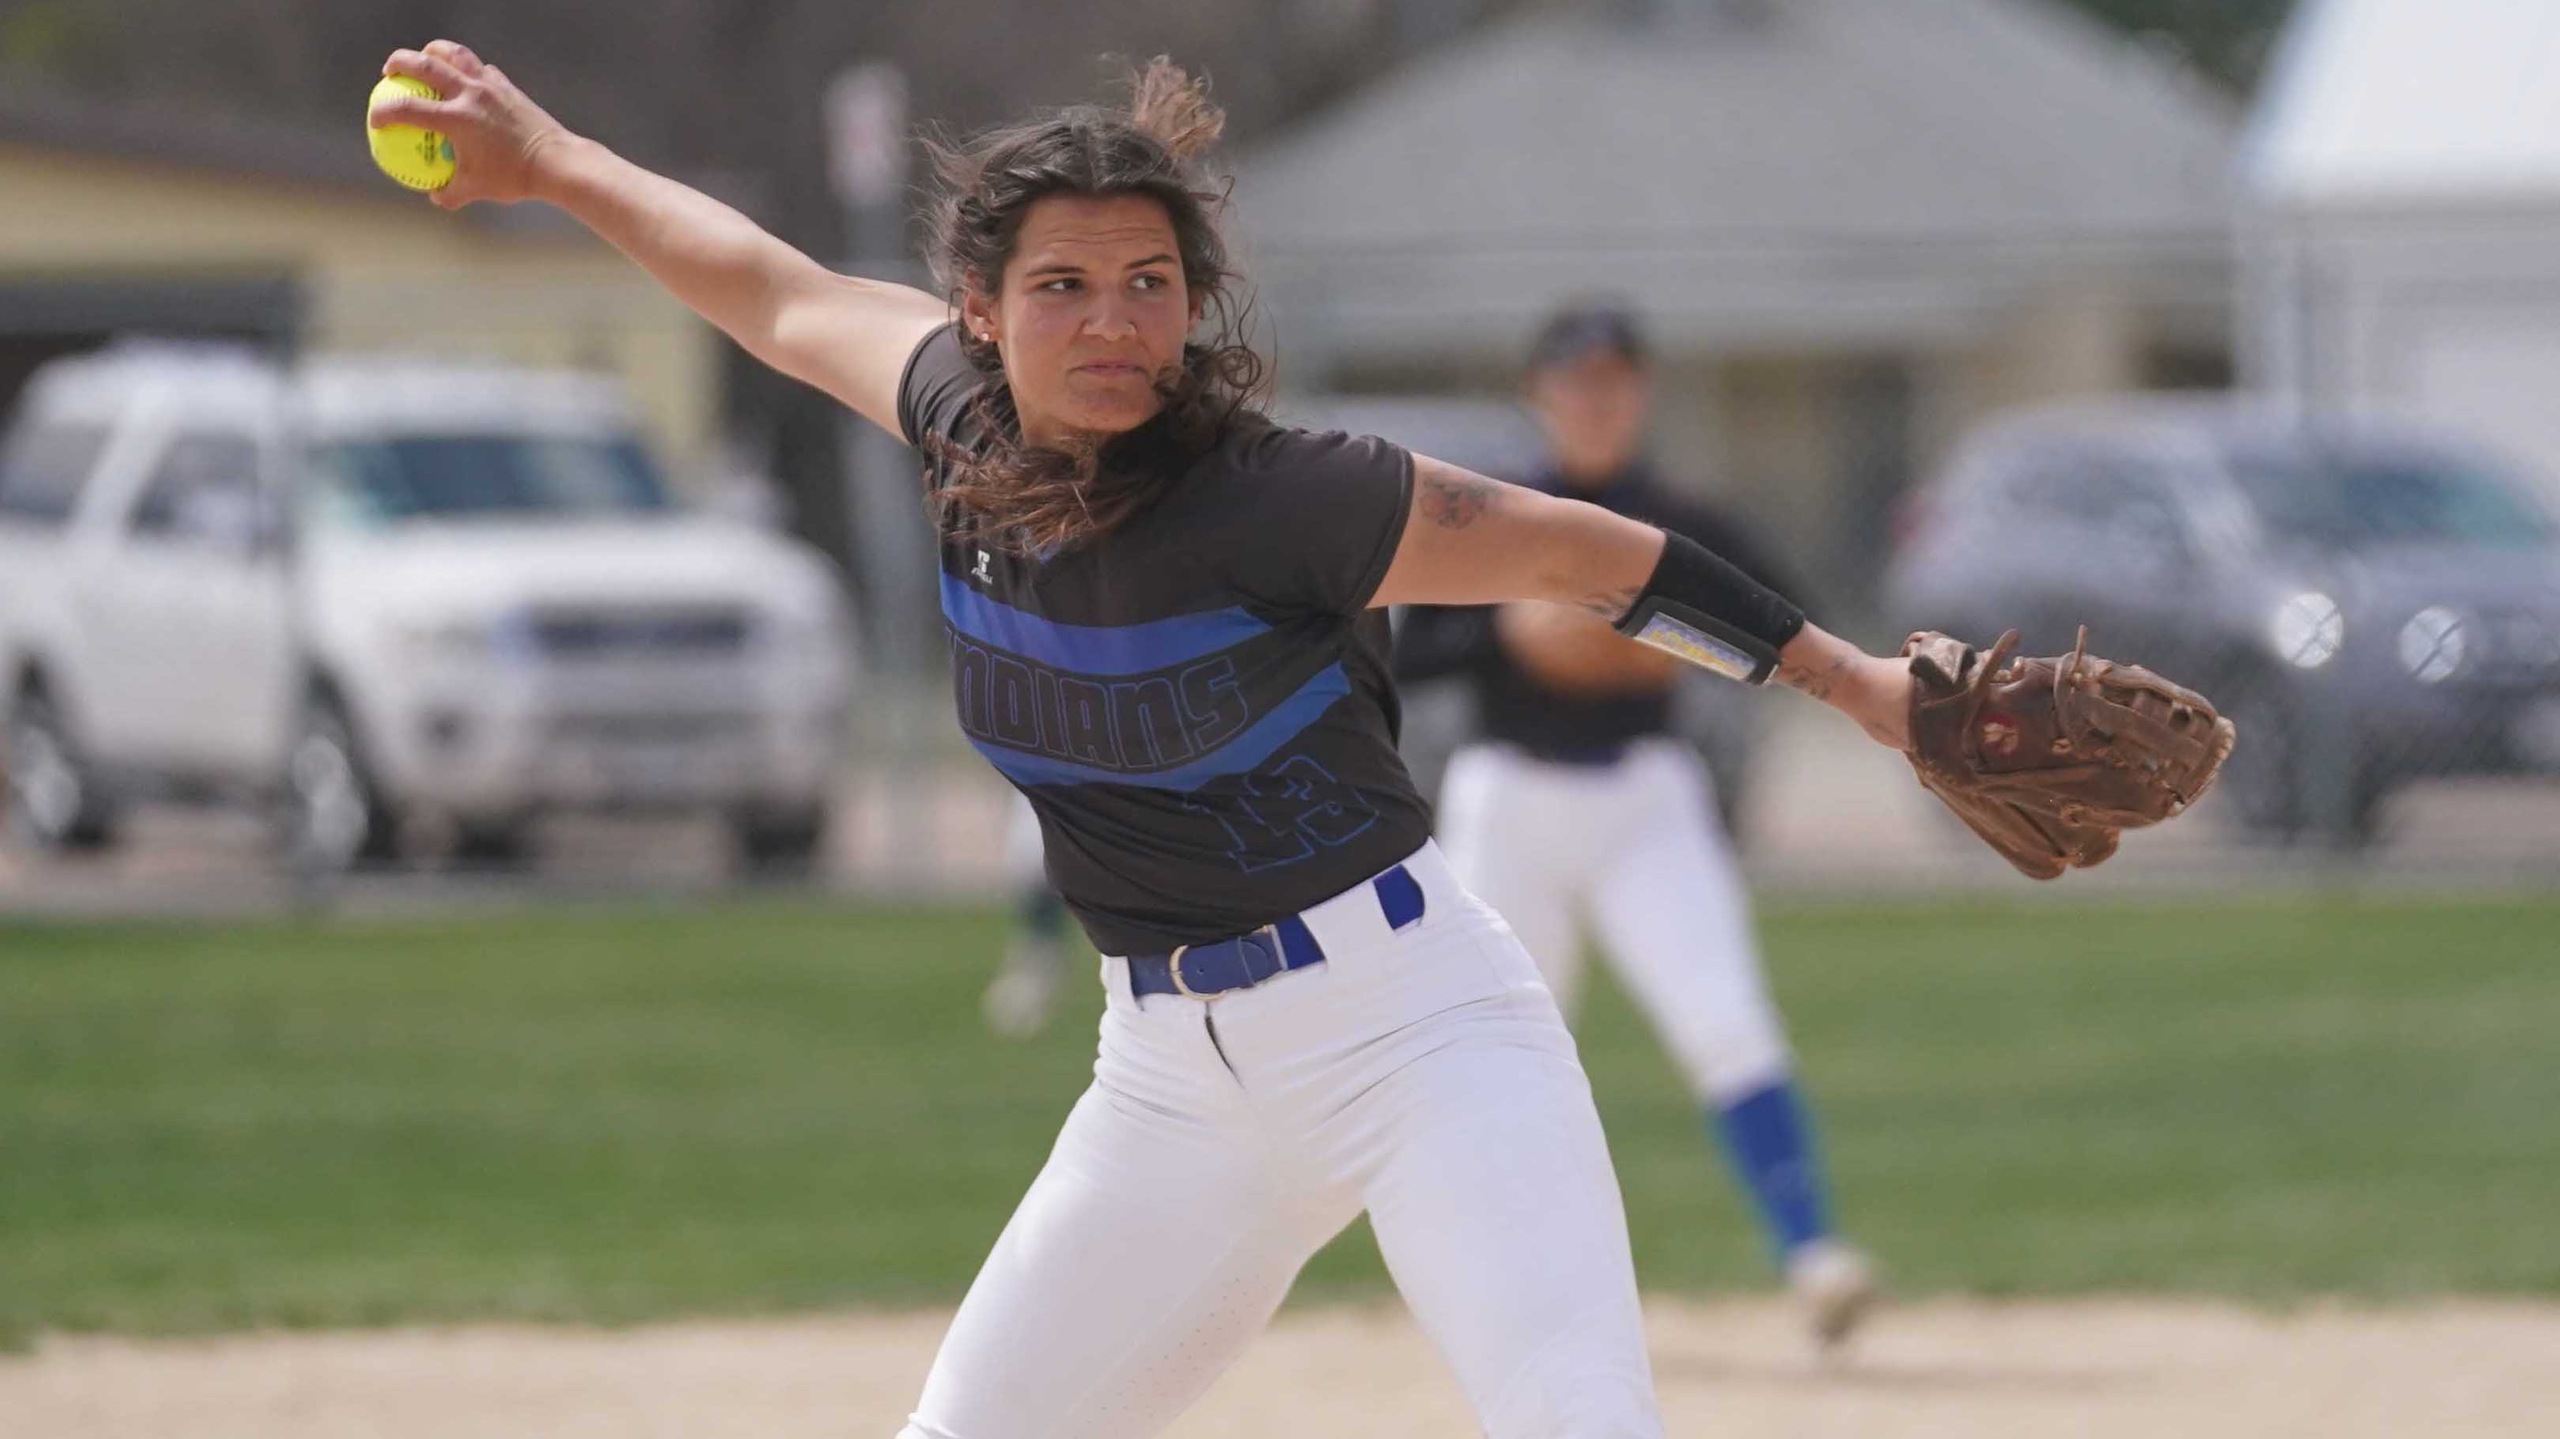 MCC Softball moves over .500 mark for first time in 6-3 season finale win over Cougars